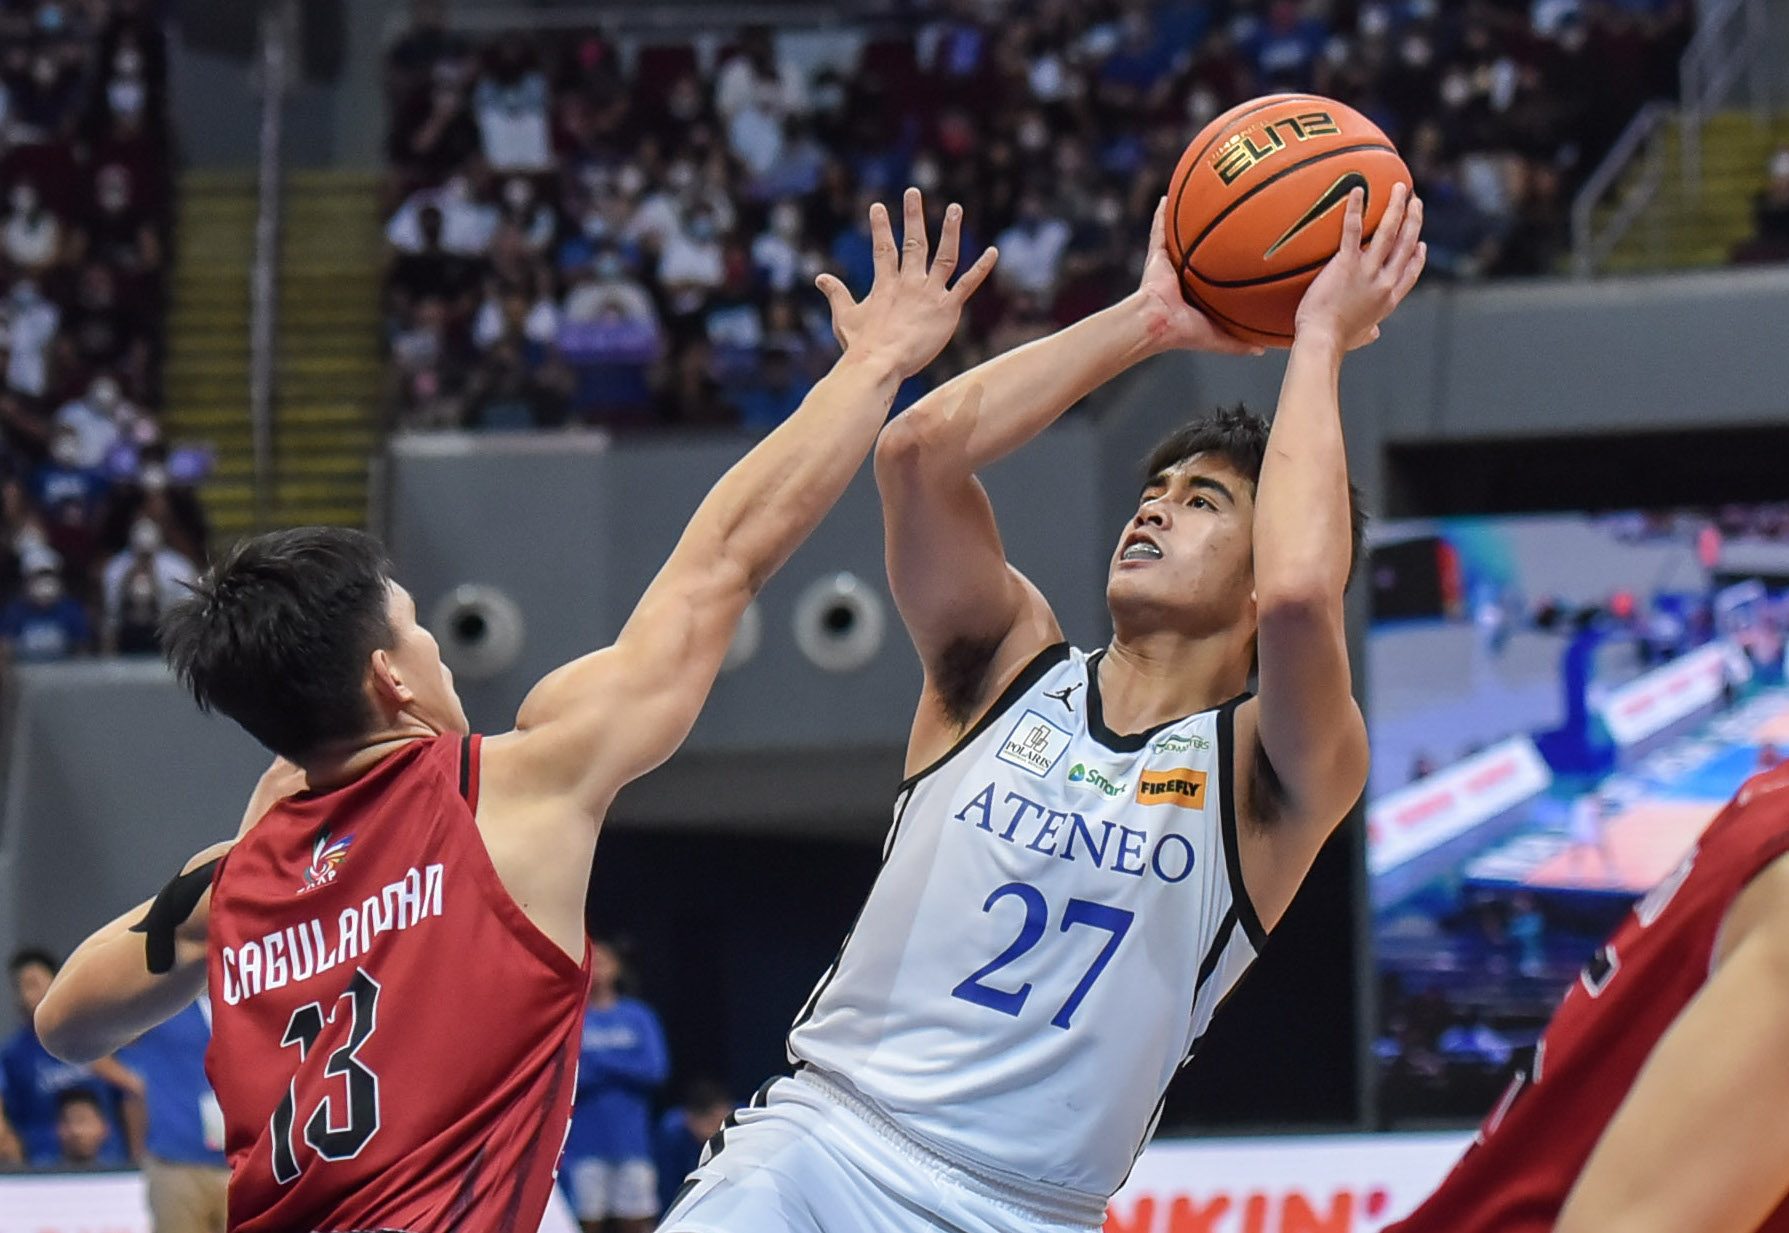 Bound for Korea? SJ Belangel yet to sign with foreign team